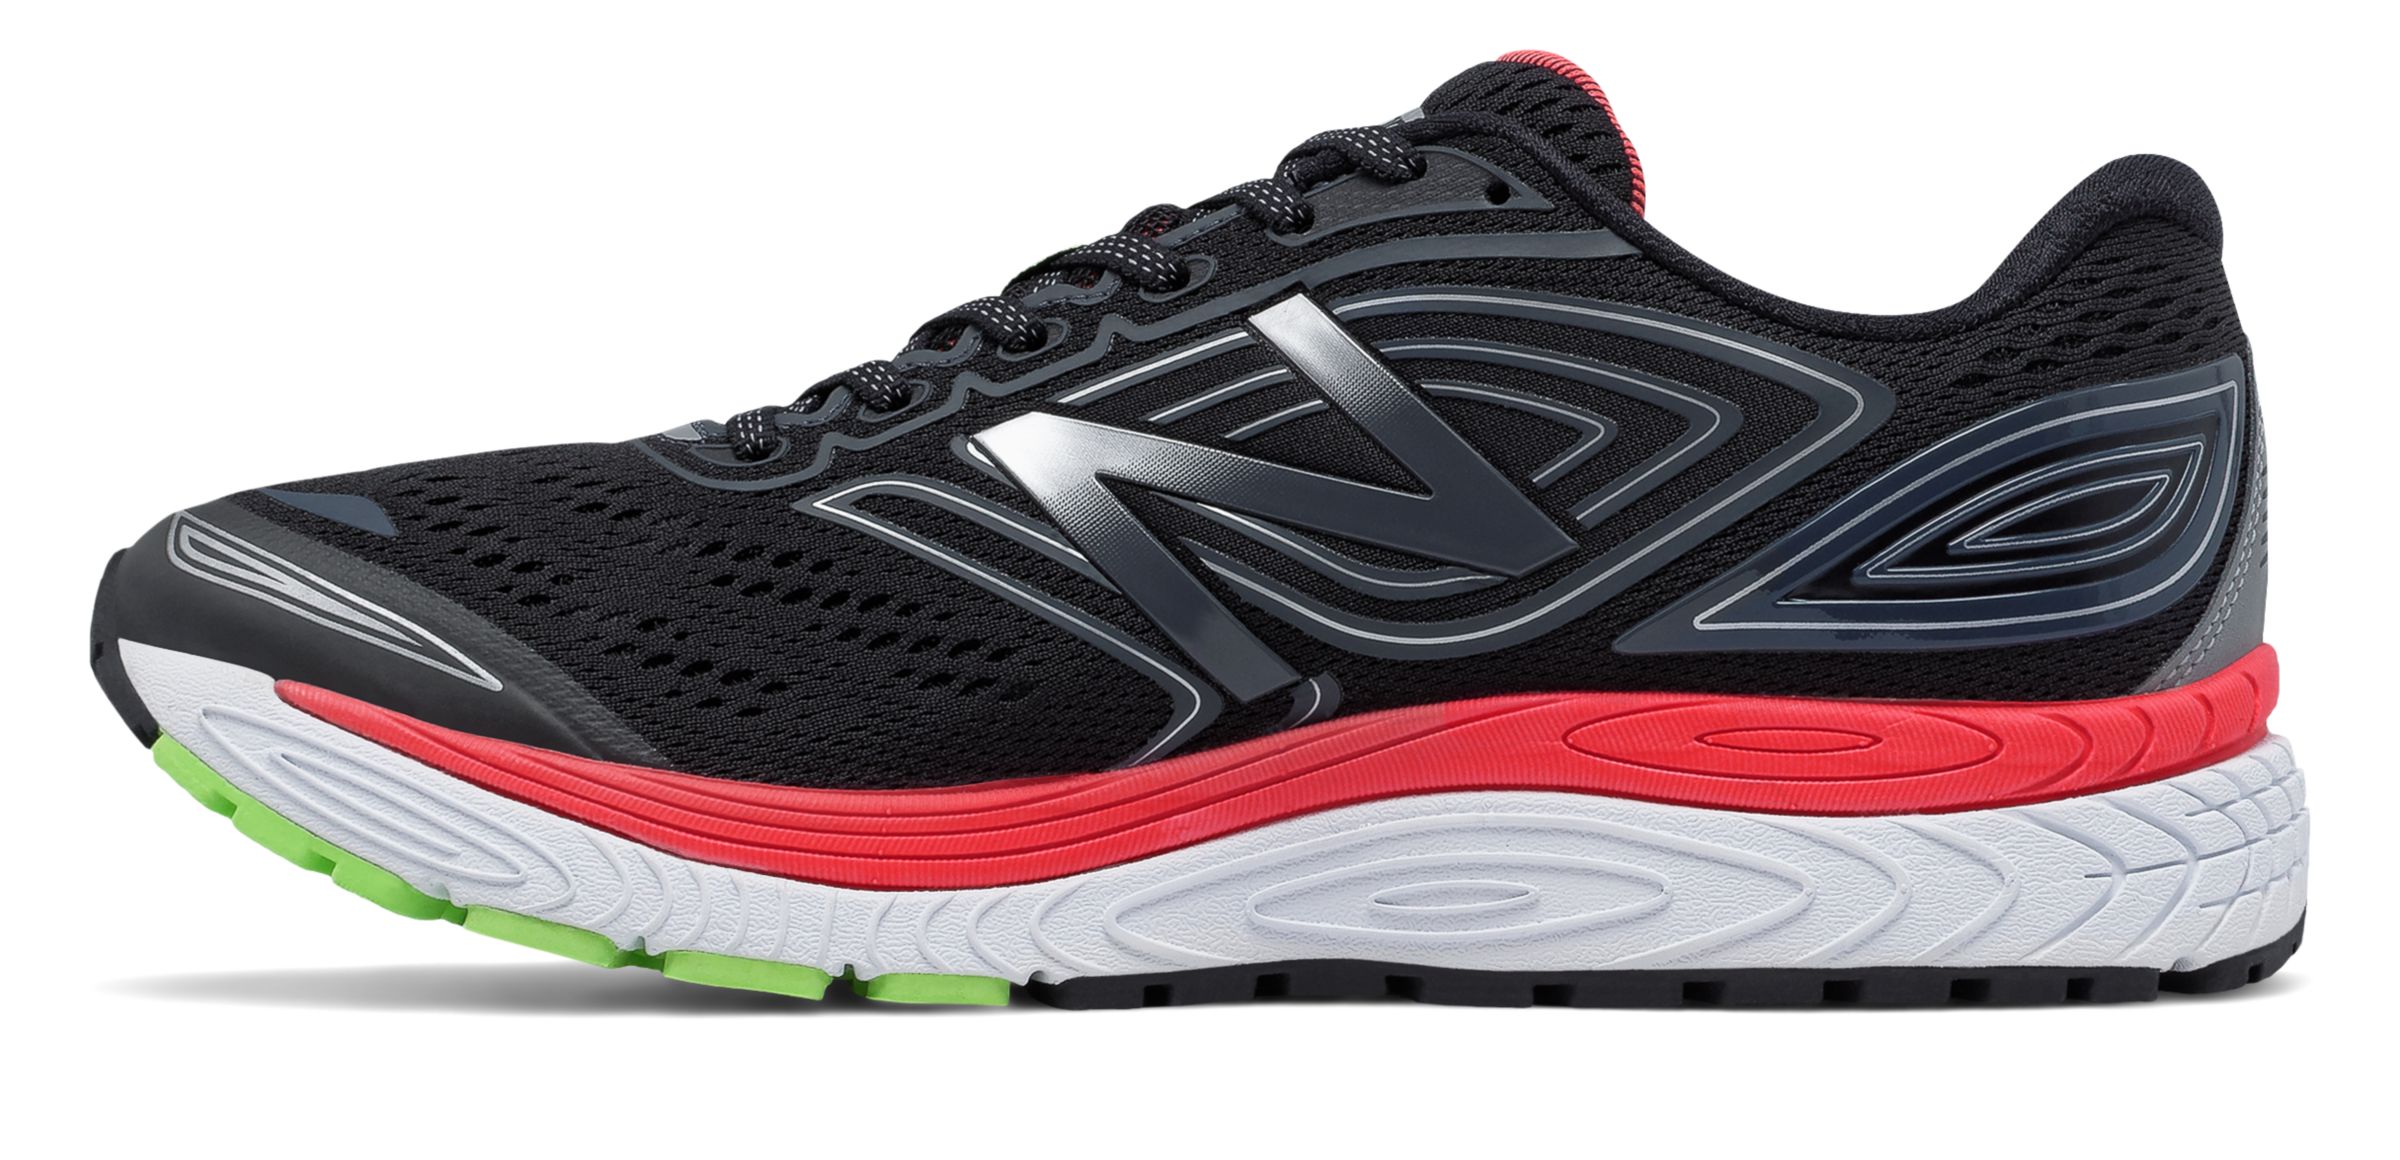 New Balance M880-V7 on Sale - Discounts Up to 60% Off on M880BR7 at Joe's New  Balance Outlet